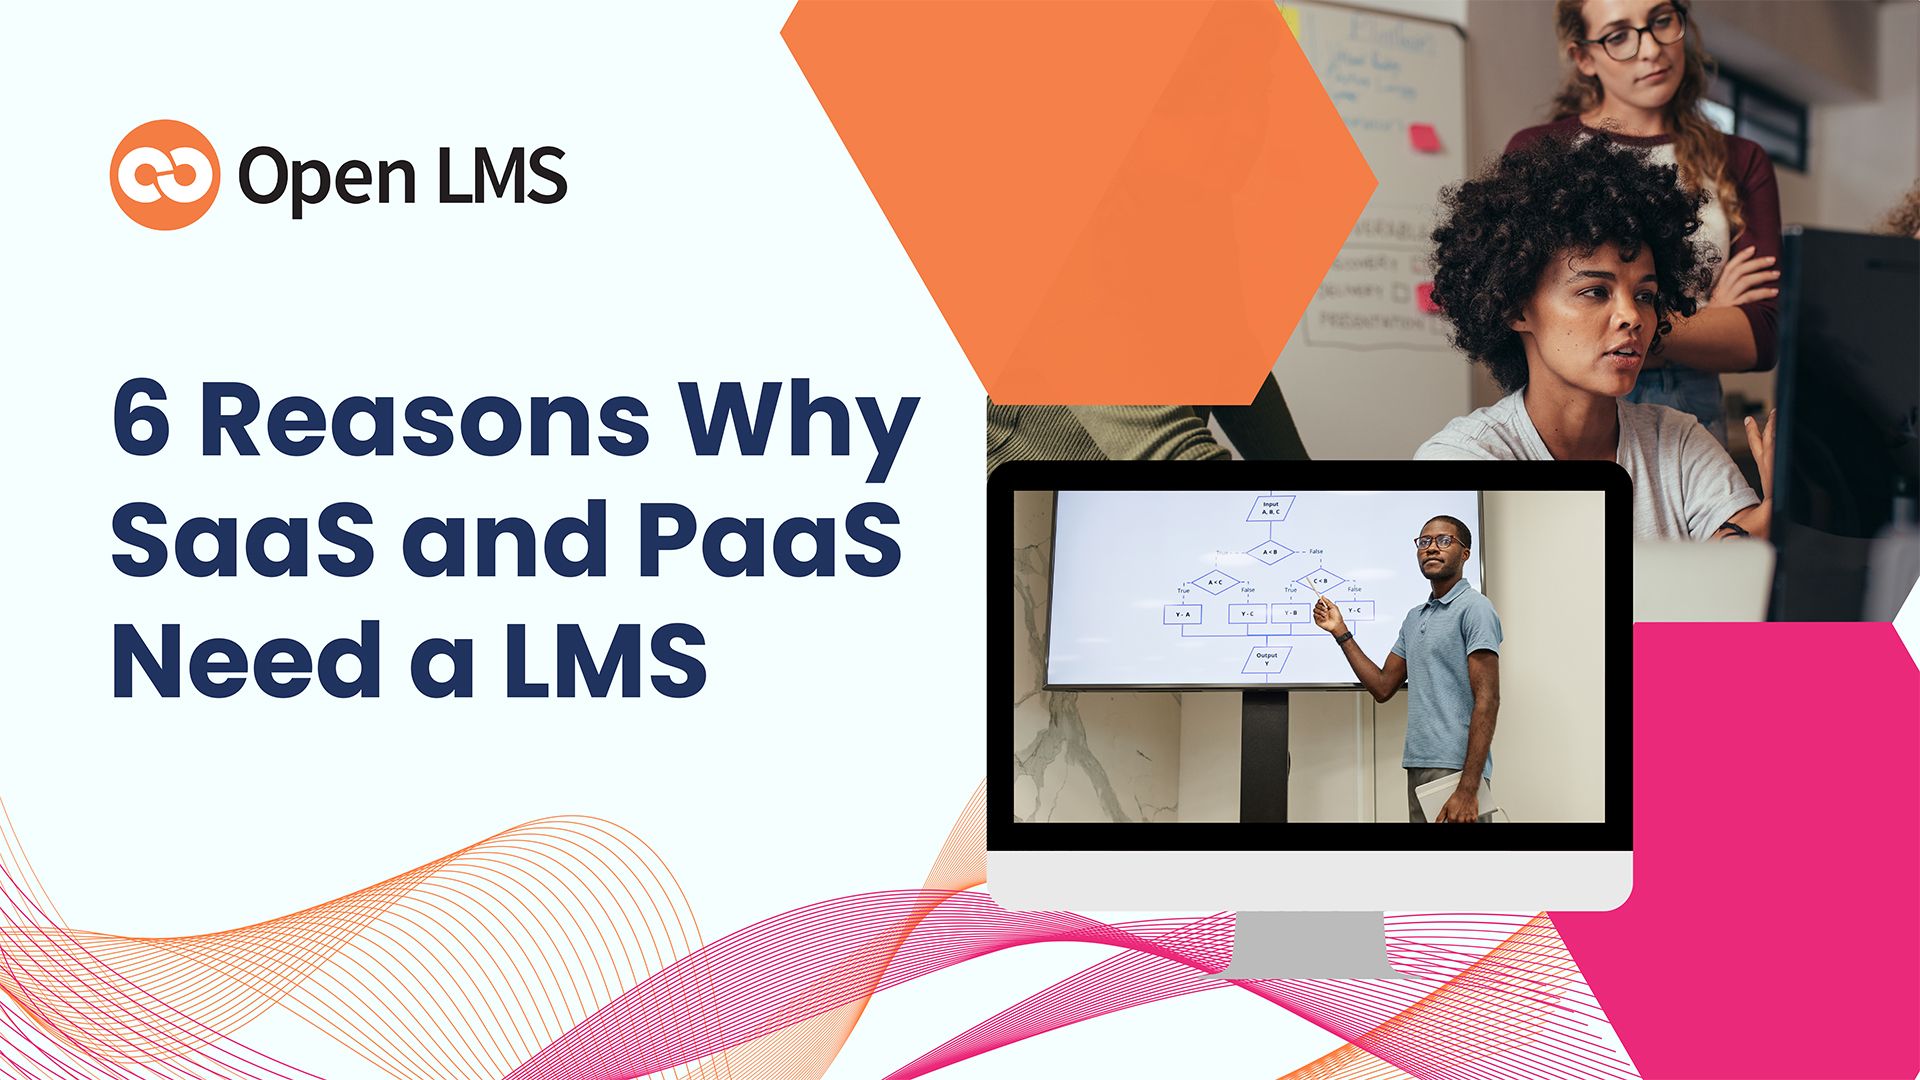 6 Reasons Why SaaS and PaaS Companies Need a Learning Management System